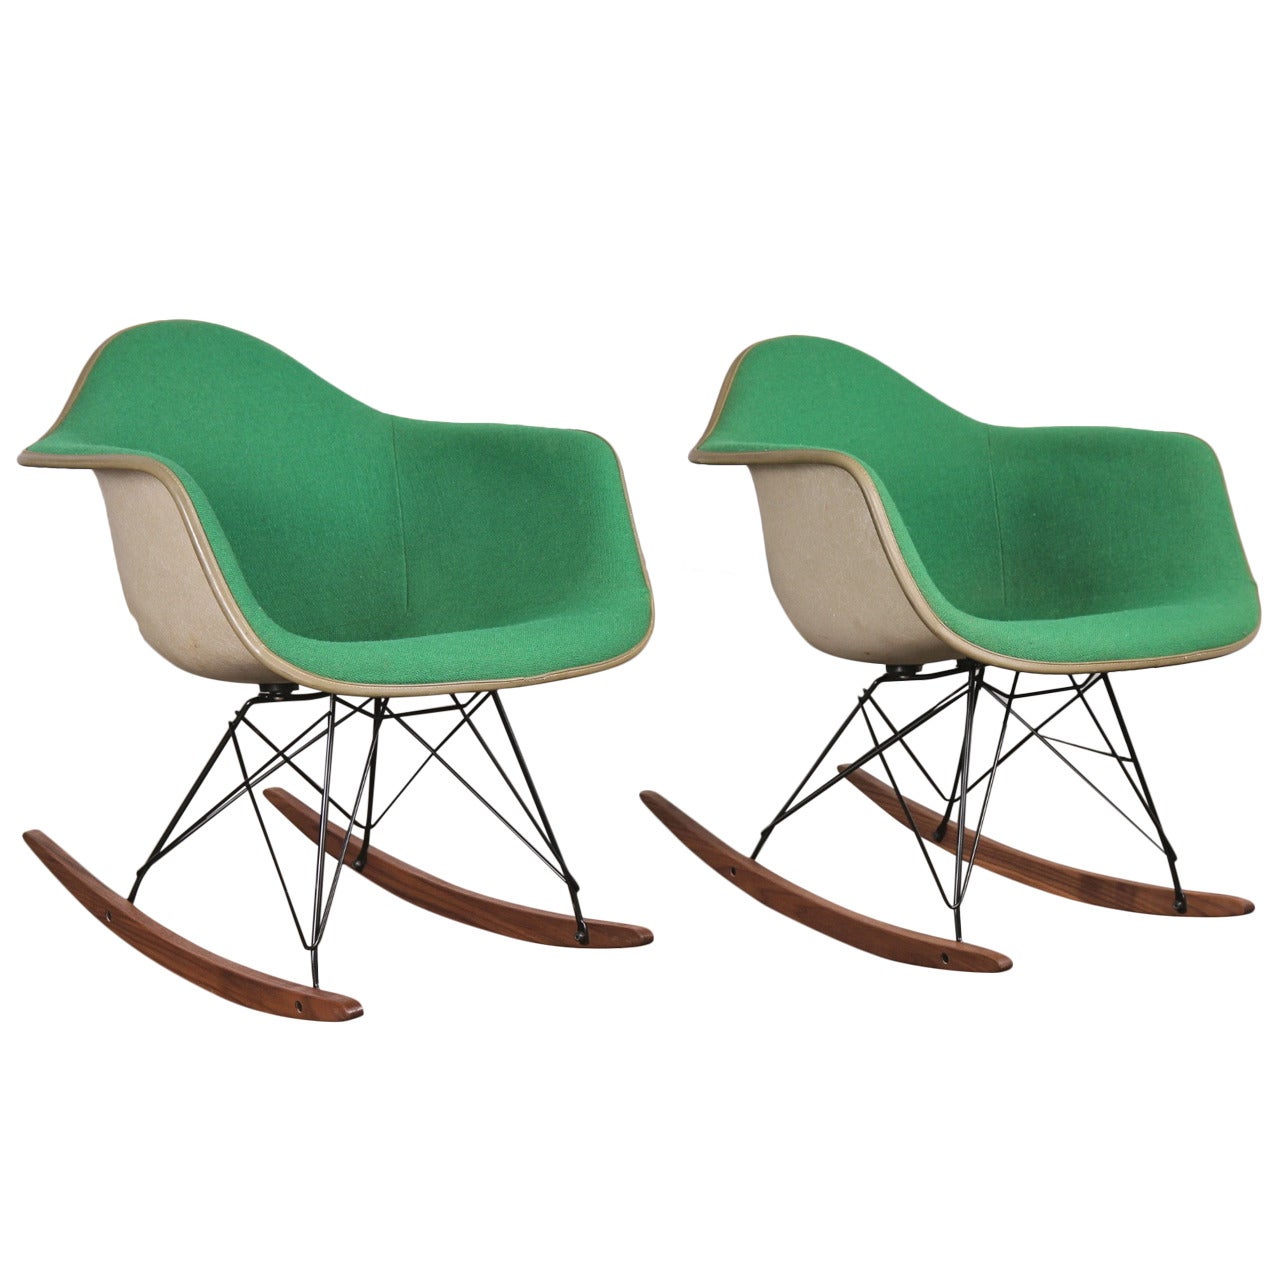 Vintage Green Eames Upholstered Rocking Chair - One Left